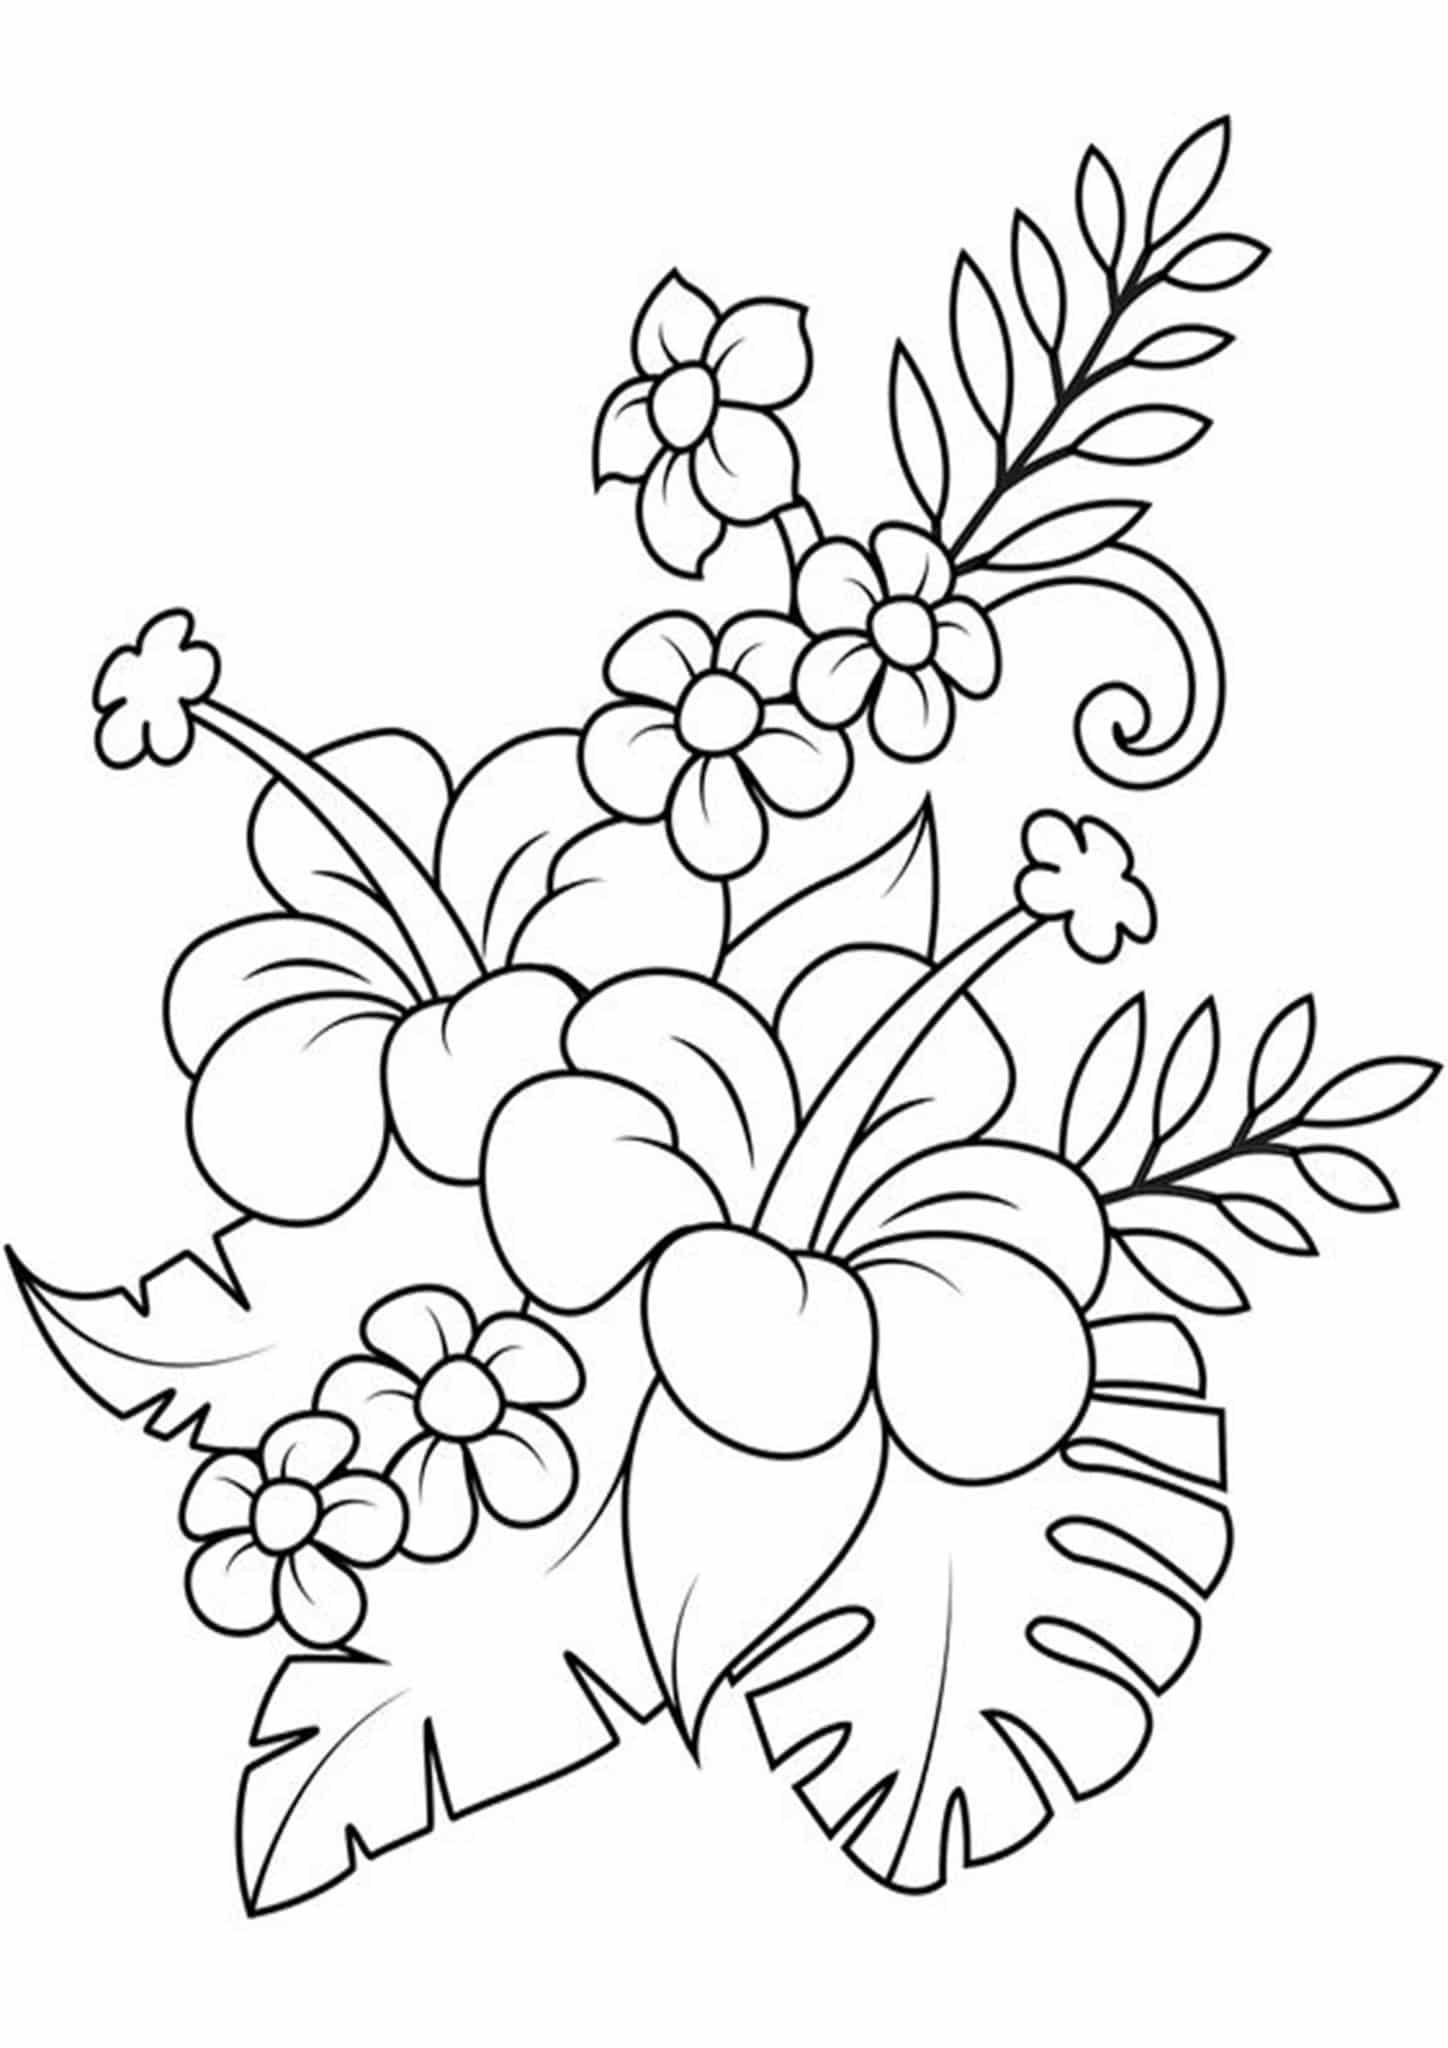 Printable Coloring Sheet Fish Coloring Pages For Kids